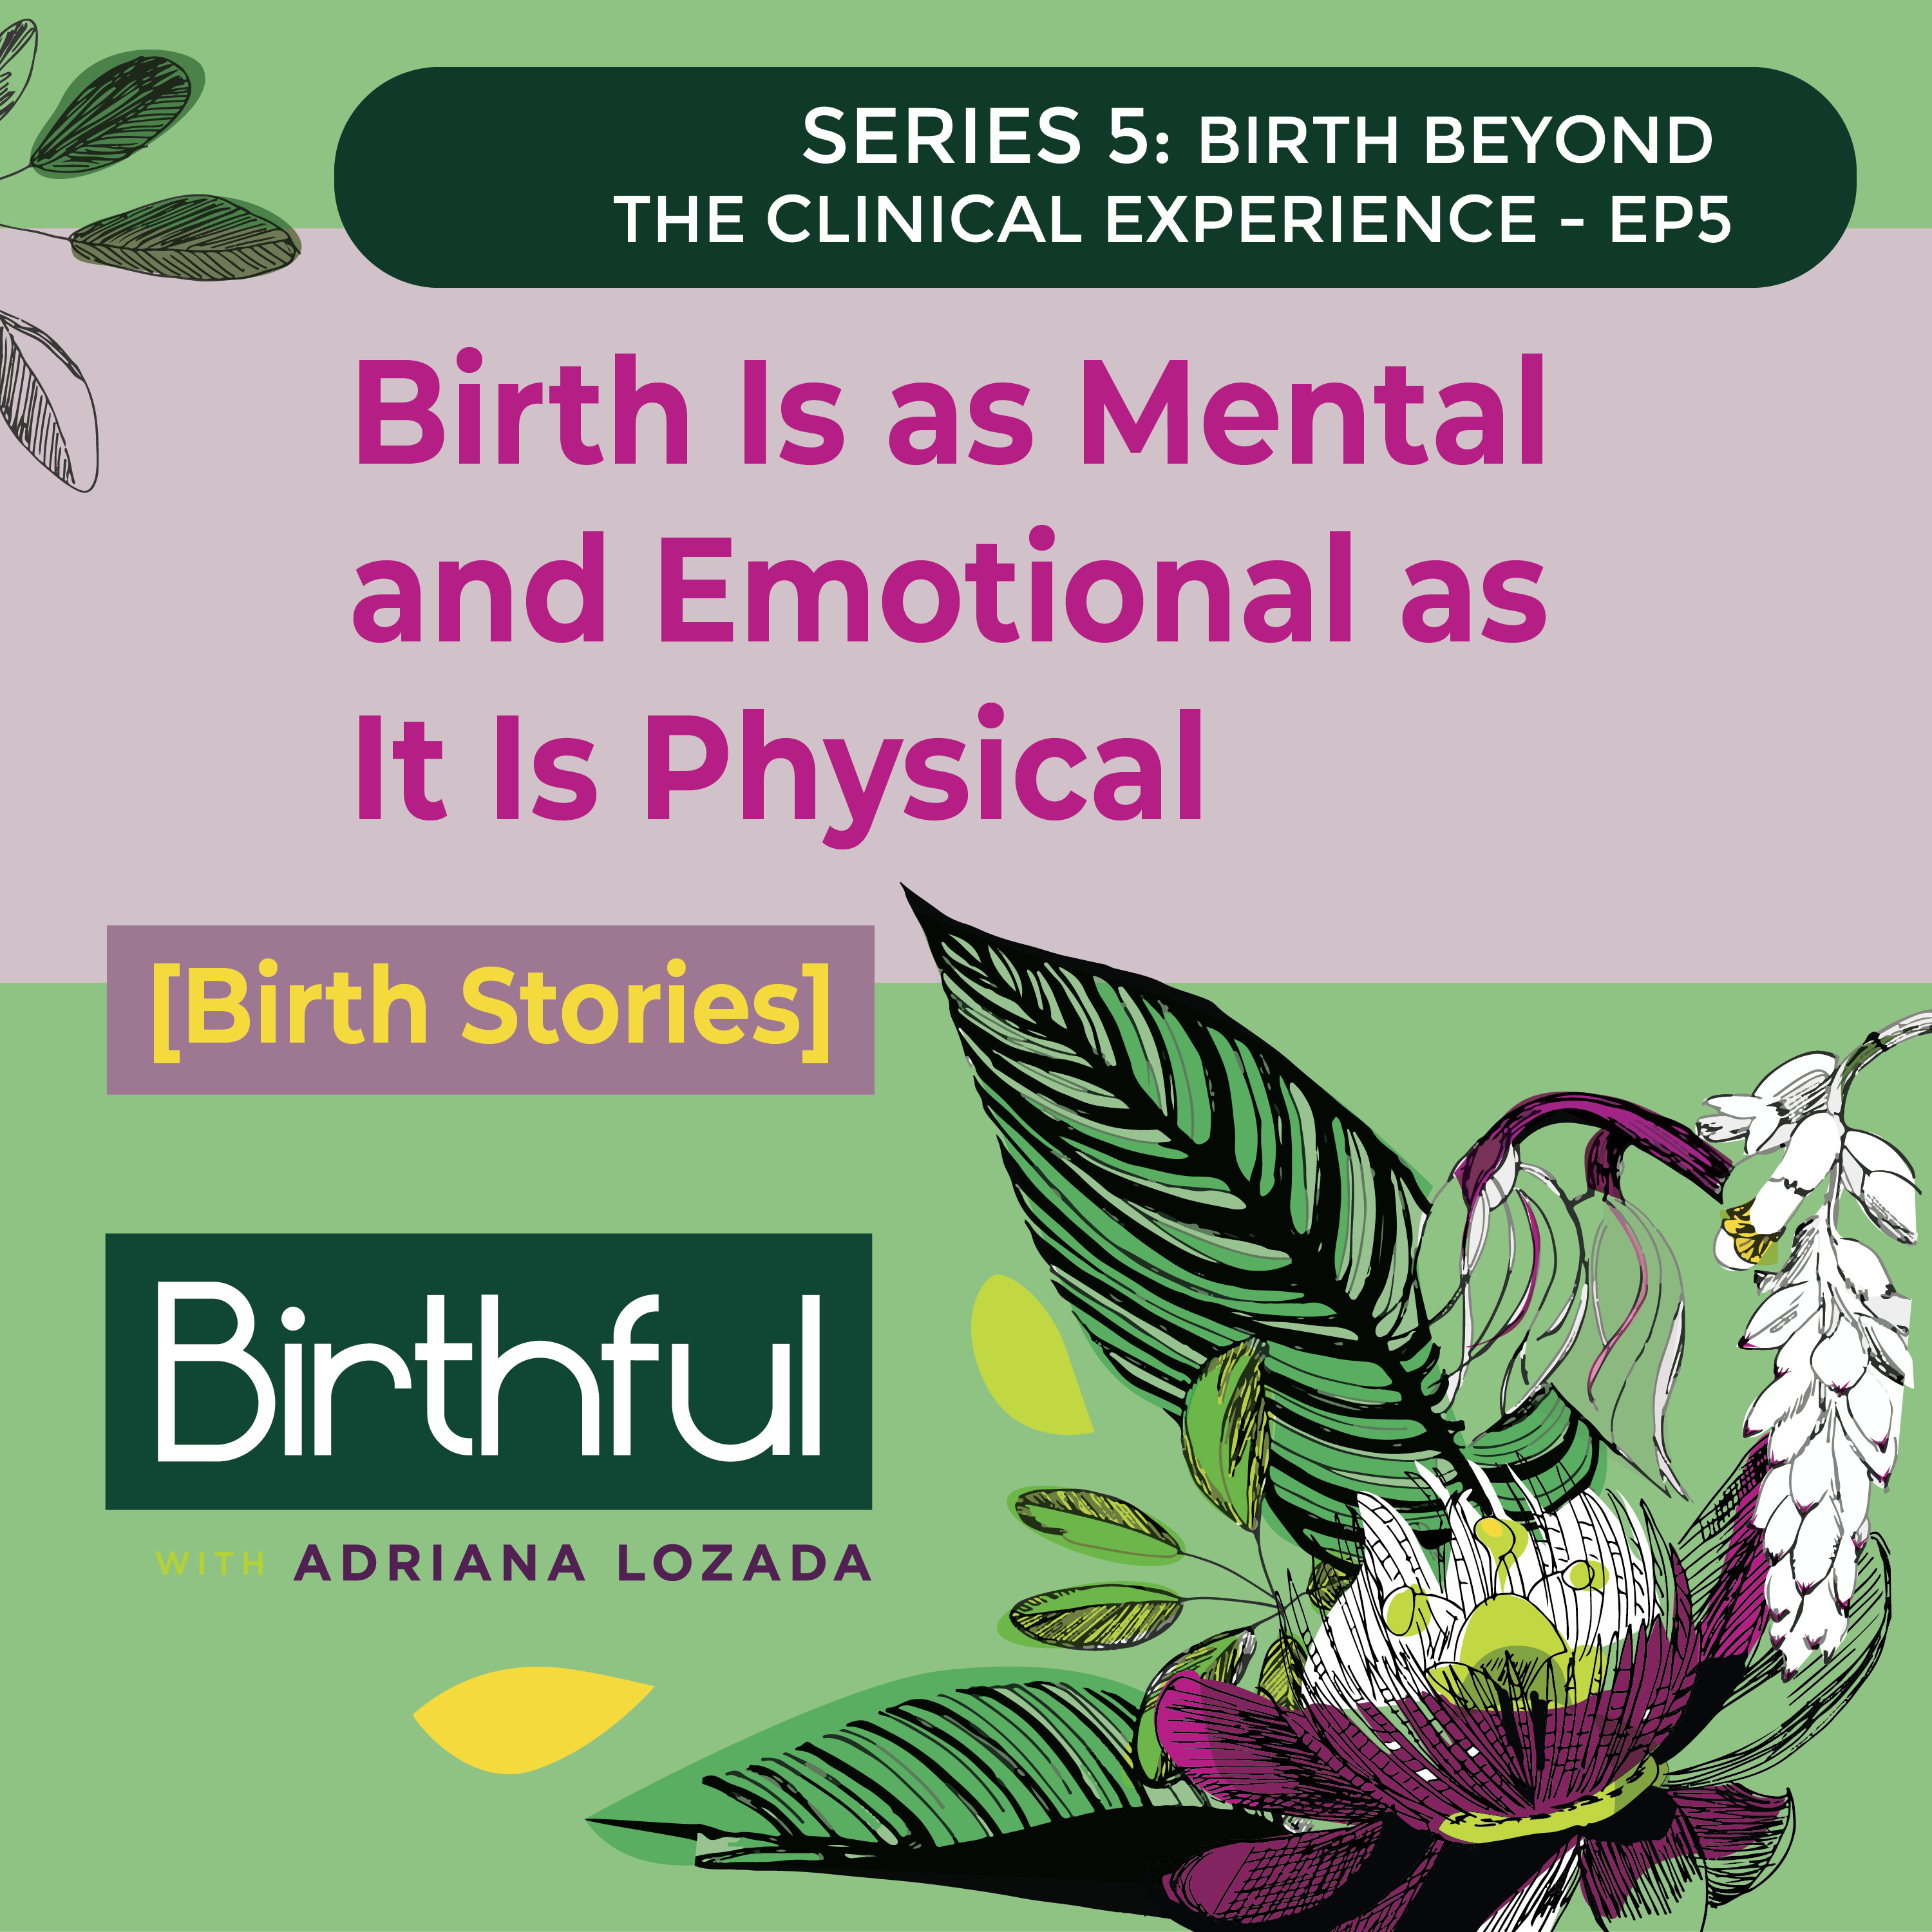 [Birth Stories] Birth Is as Mental and Emotional as It Is Physical